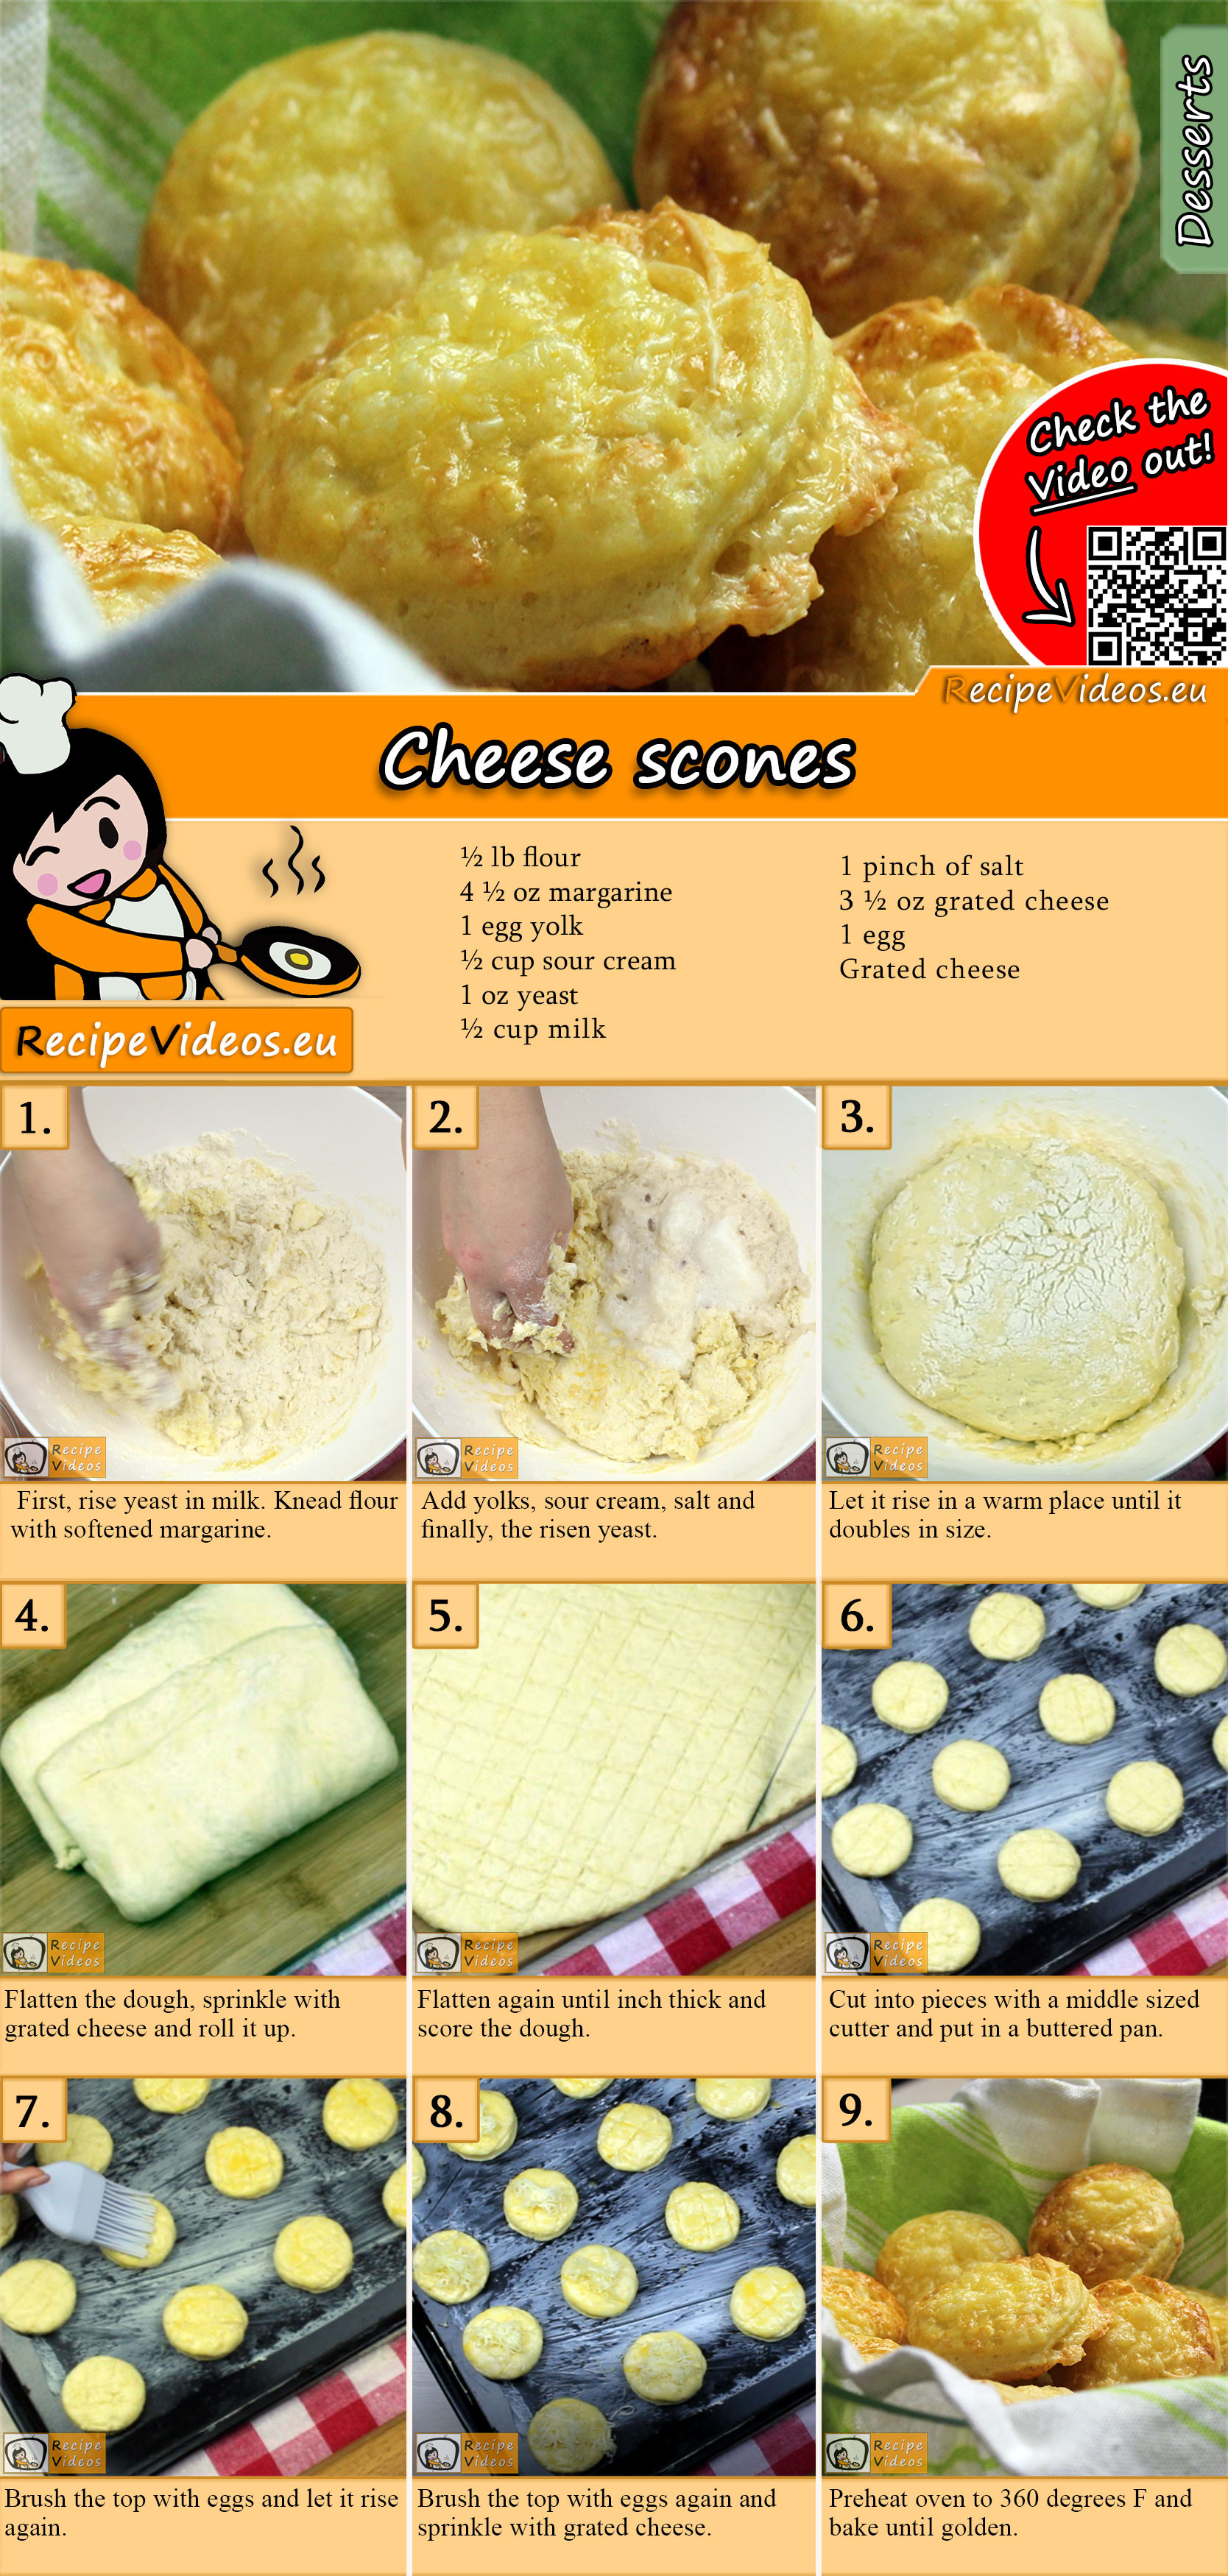 Cheese scones recipe with video